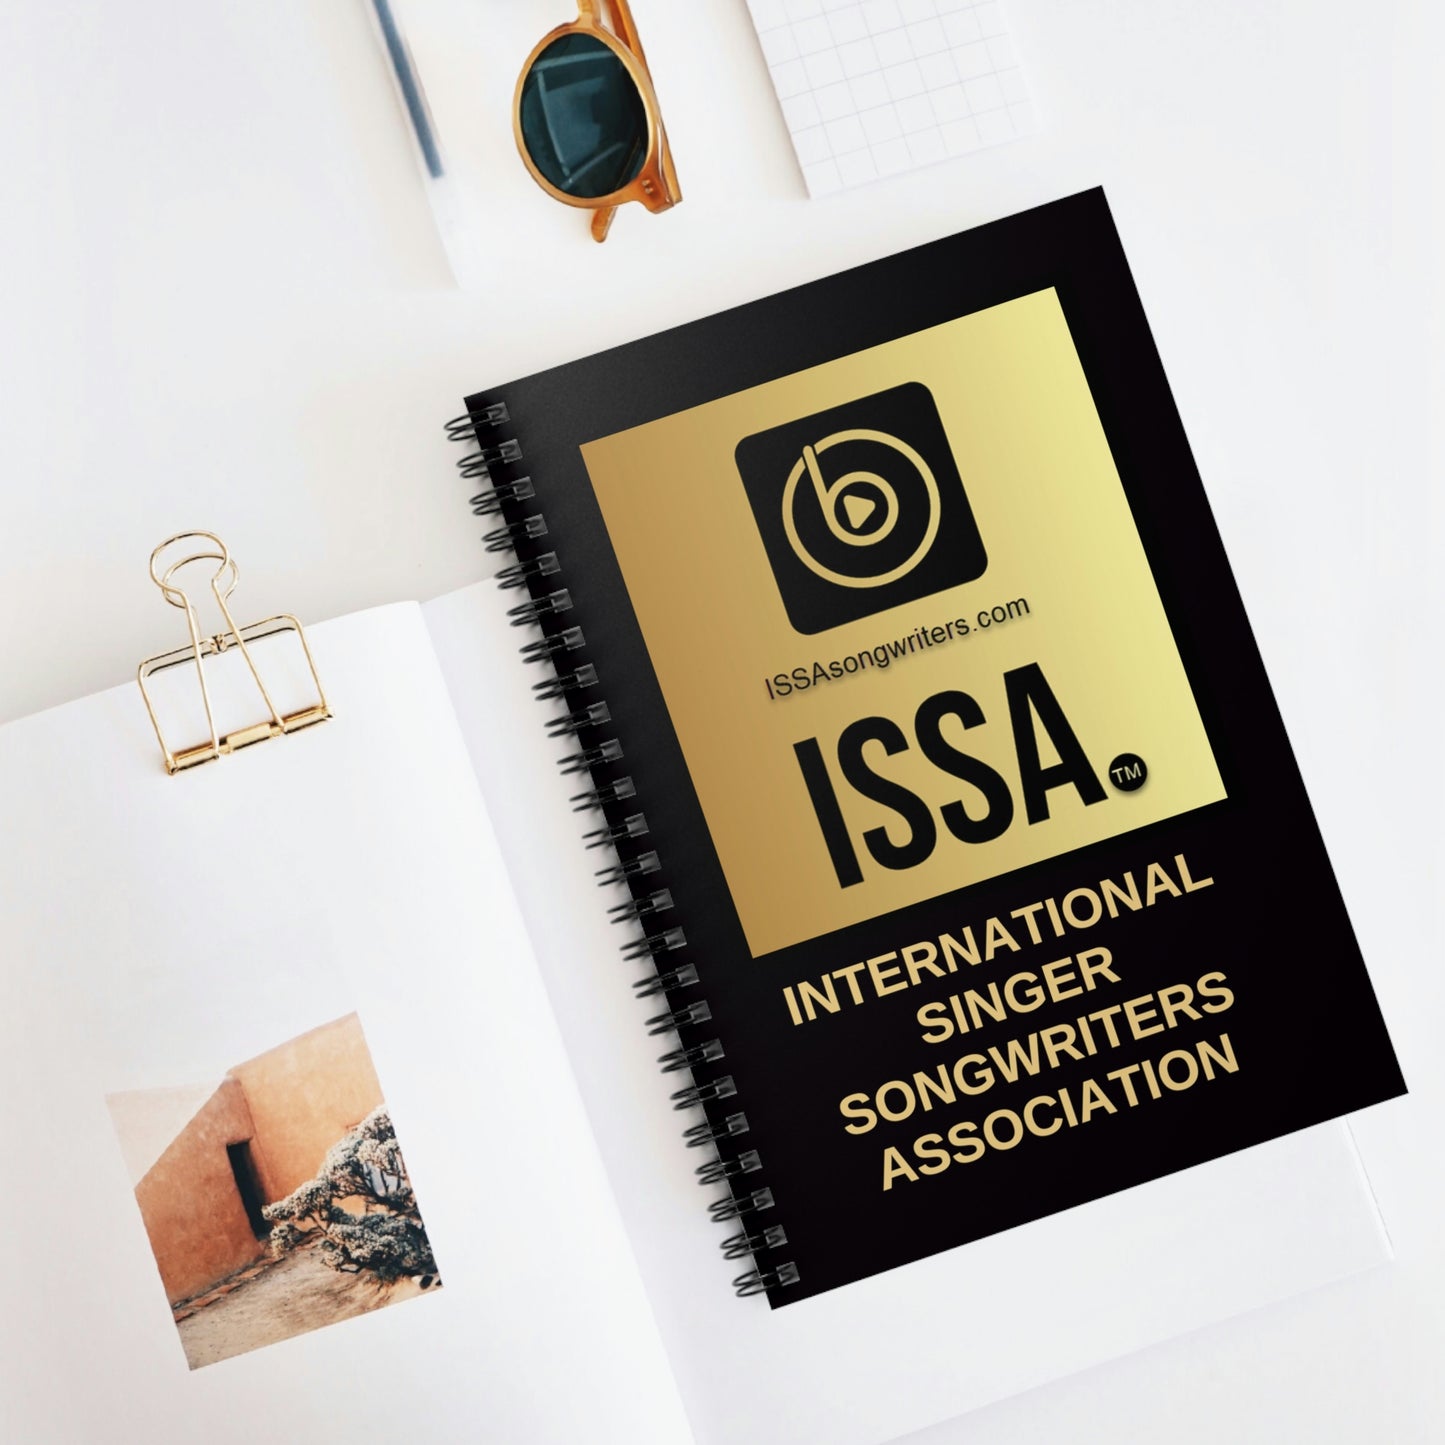 Official ISSA Spiral Notebook - Ruled Line